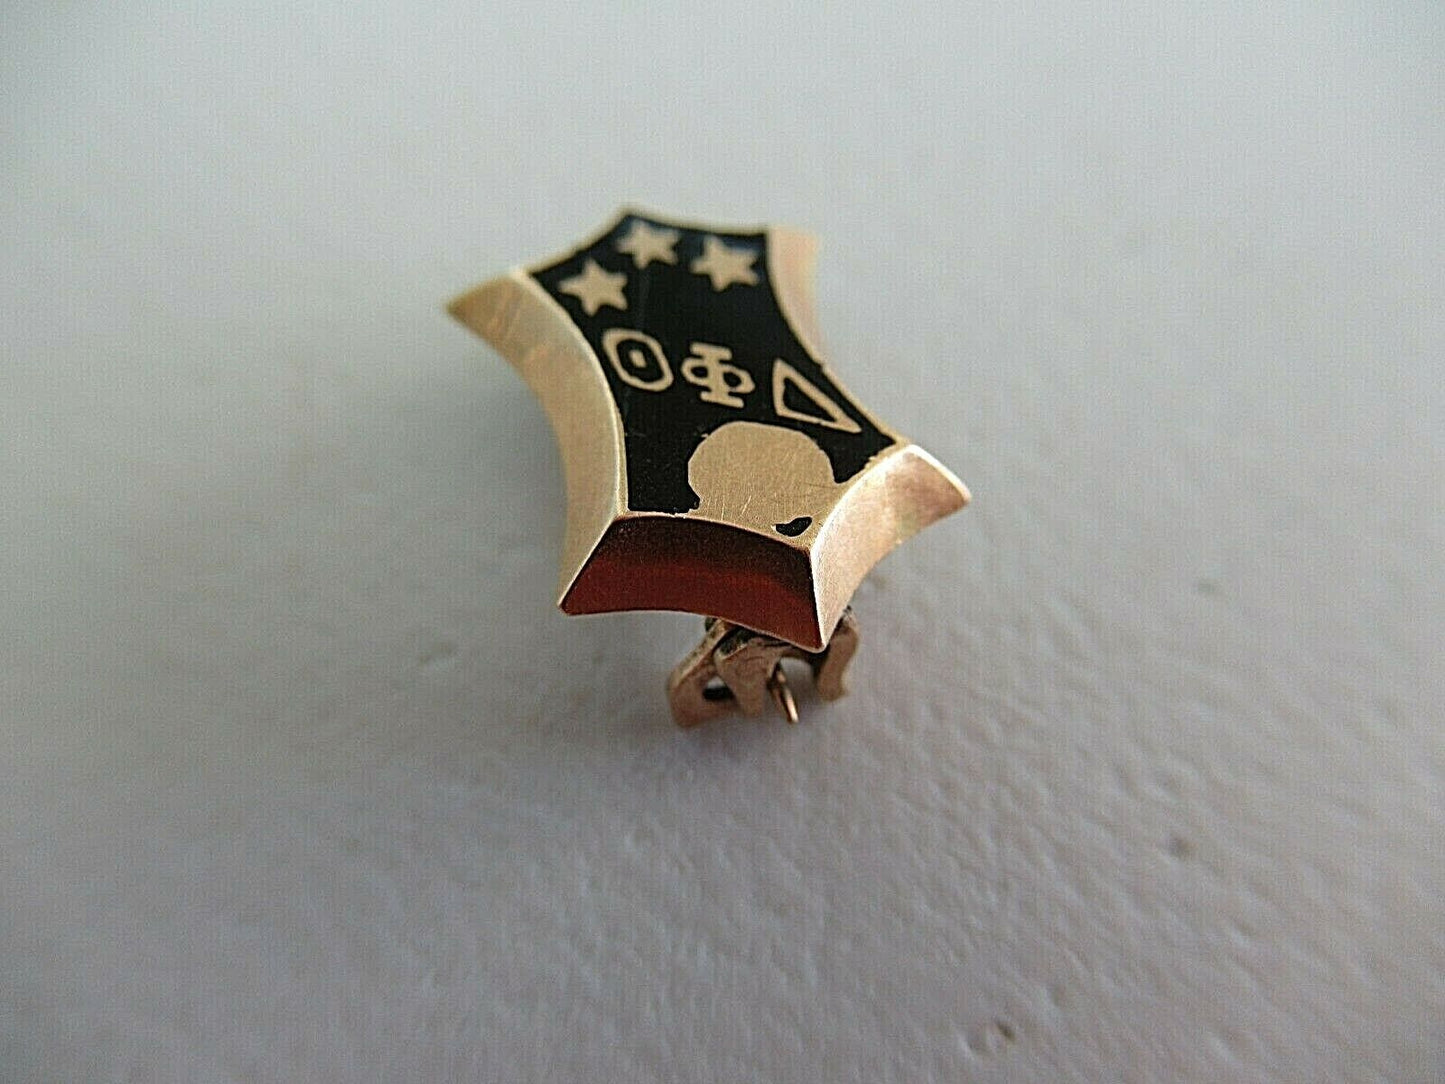 USA FRATERNITY THETA PHI DELTA. MADE IN GOLD 14K. NAMED. MARKED. EARLY